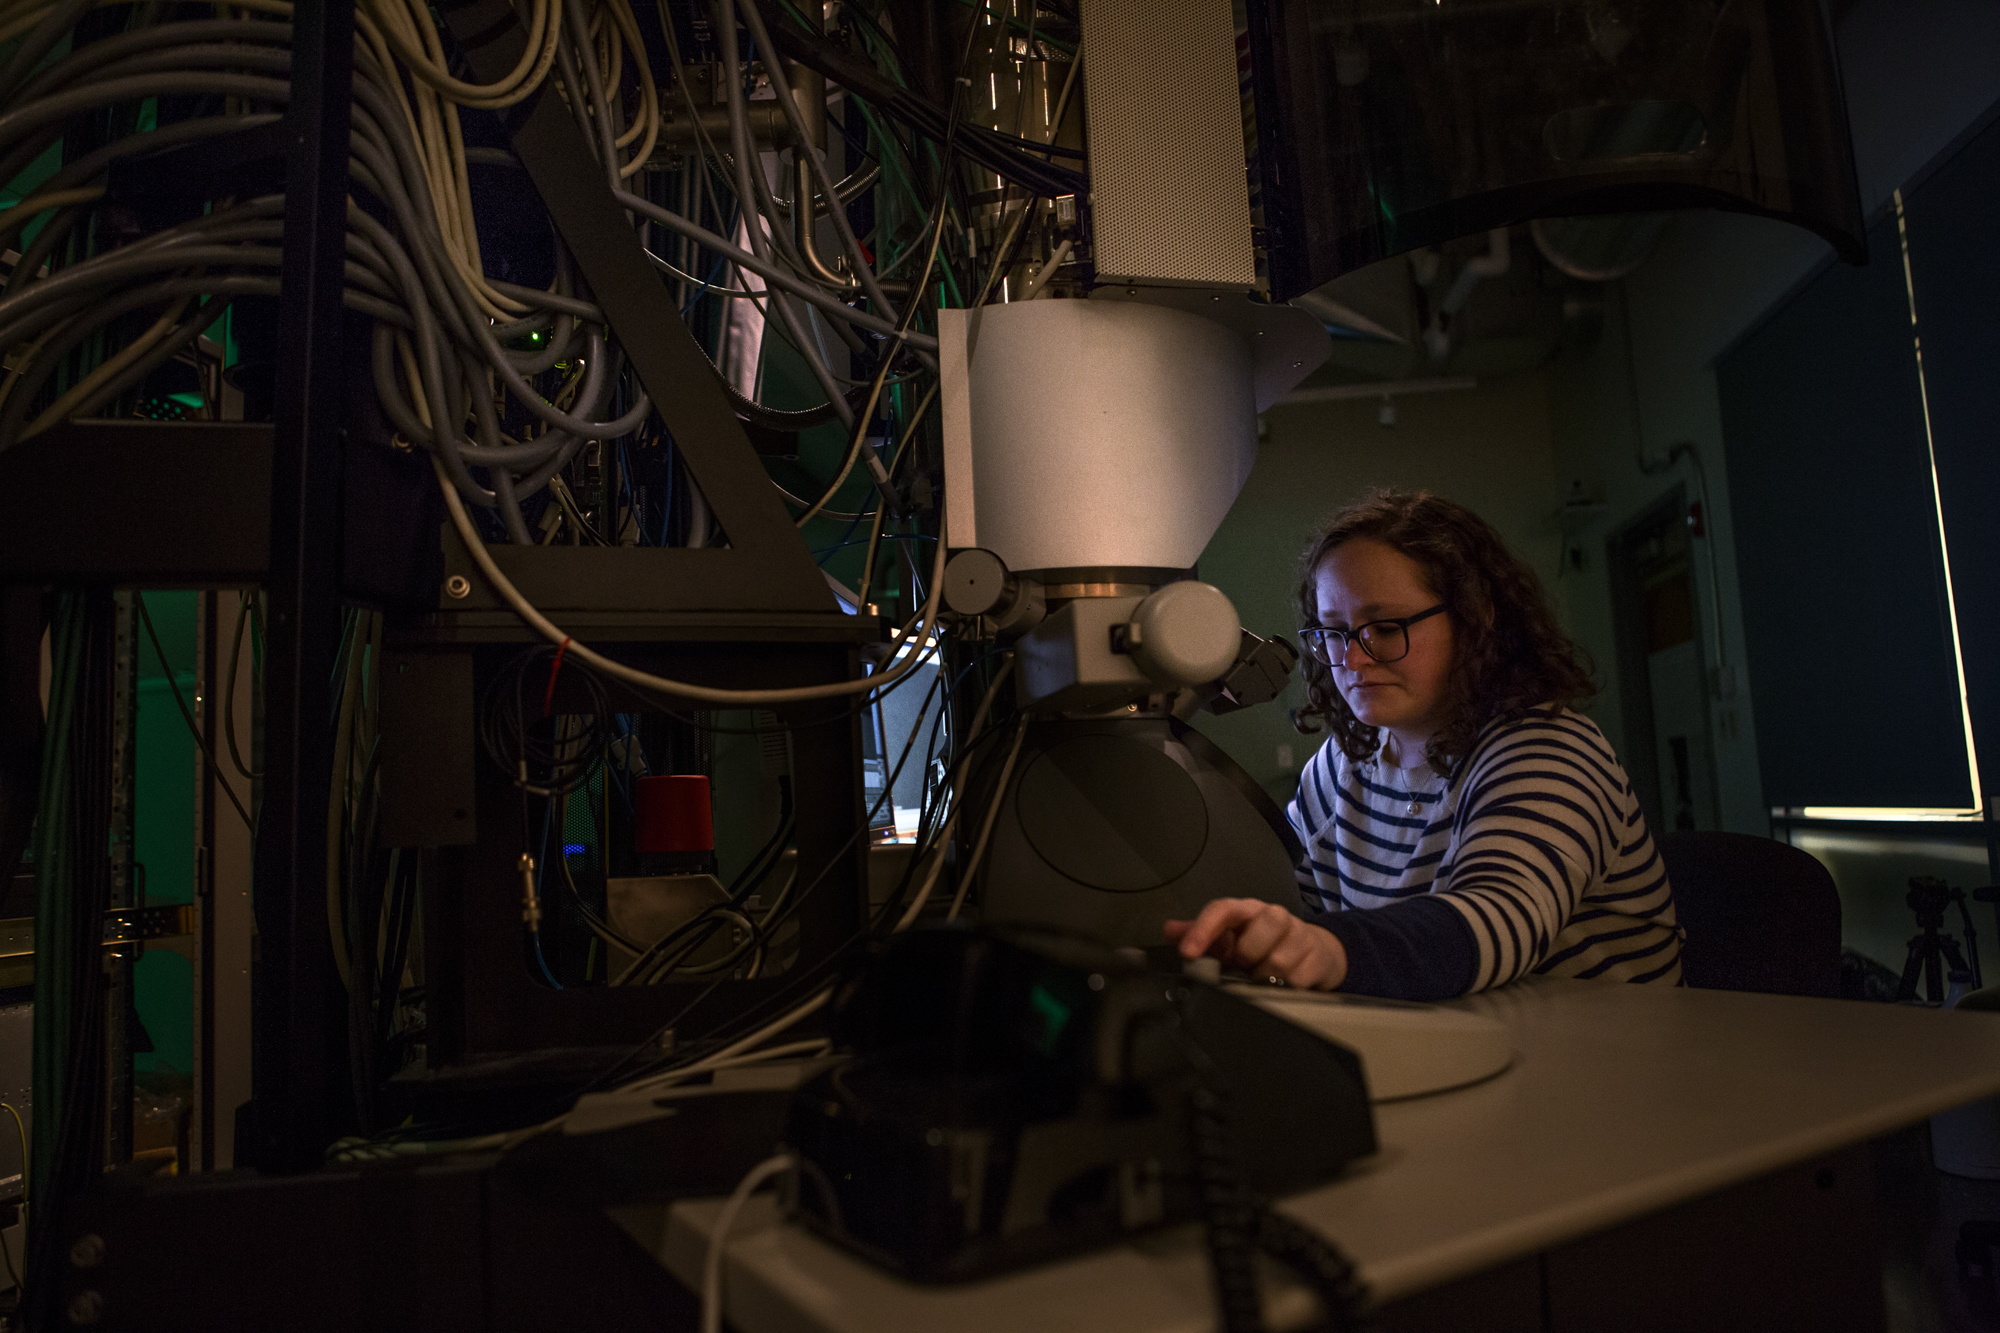  Alice Greenberg, physics Ph.D. candidate at the University of Oregon spends a Saturday afternoon in the dark basement of Huestis Hall in the CAMCOR lab studying electrons. Greenberg co-founded UO Women in Physics. 